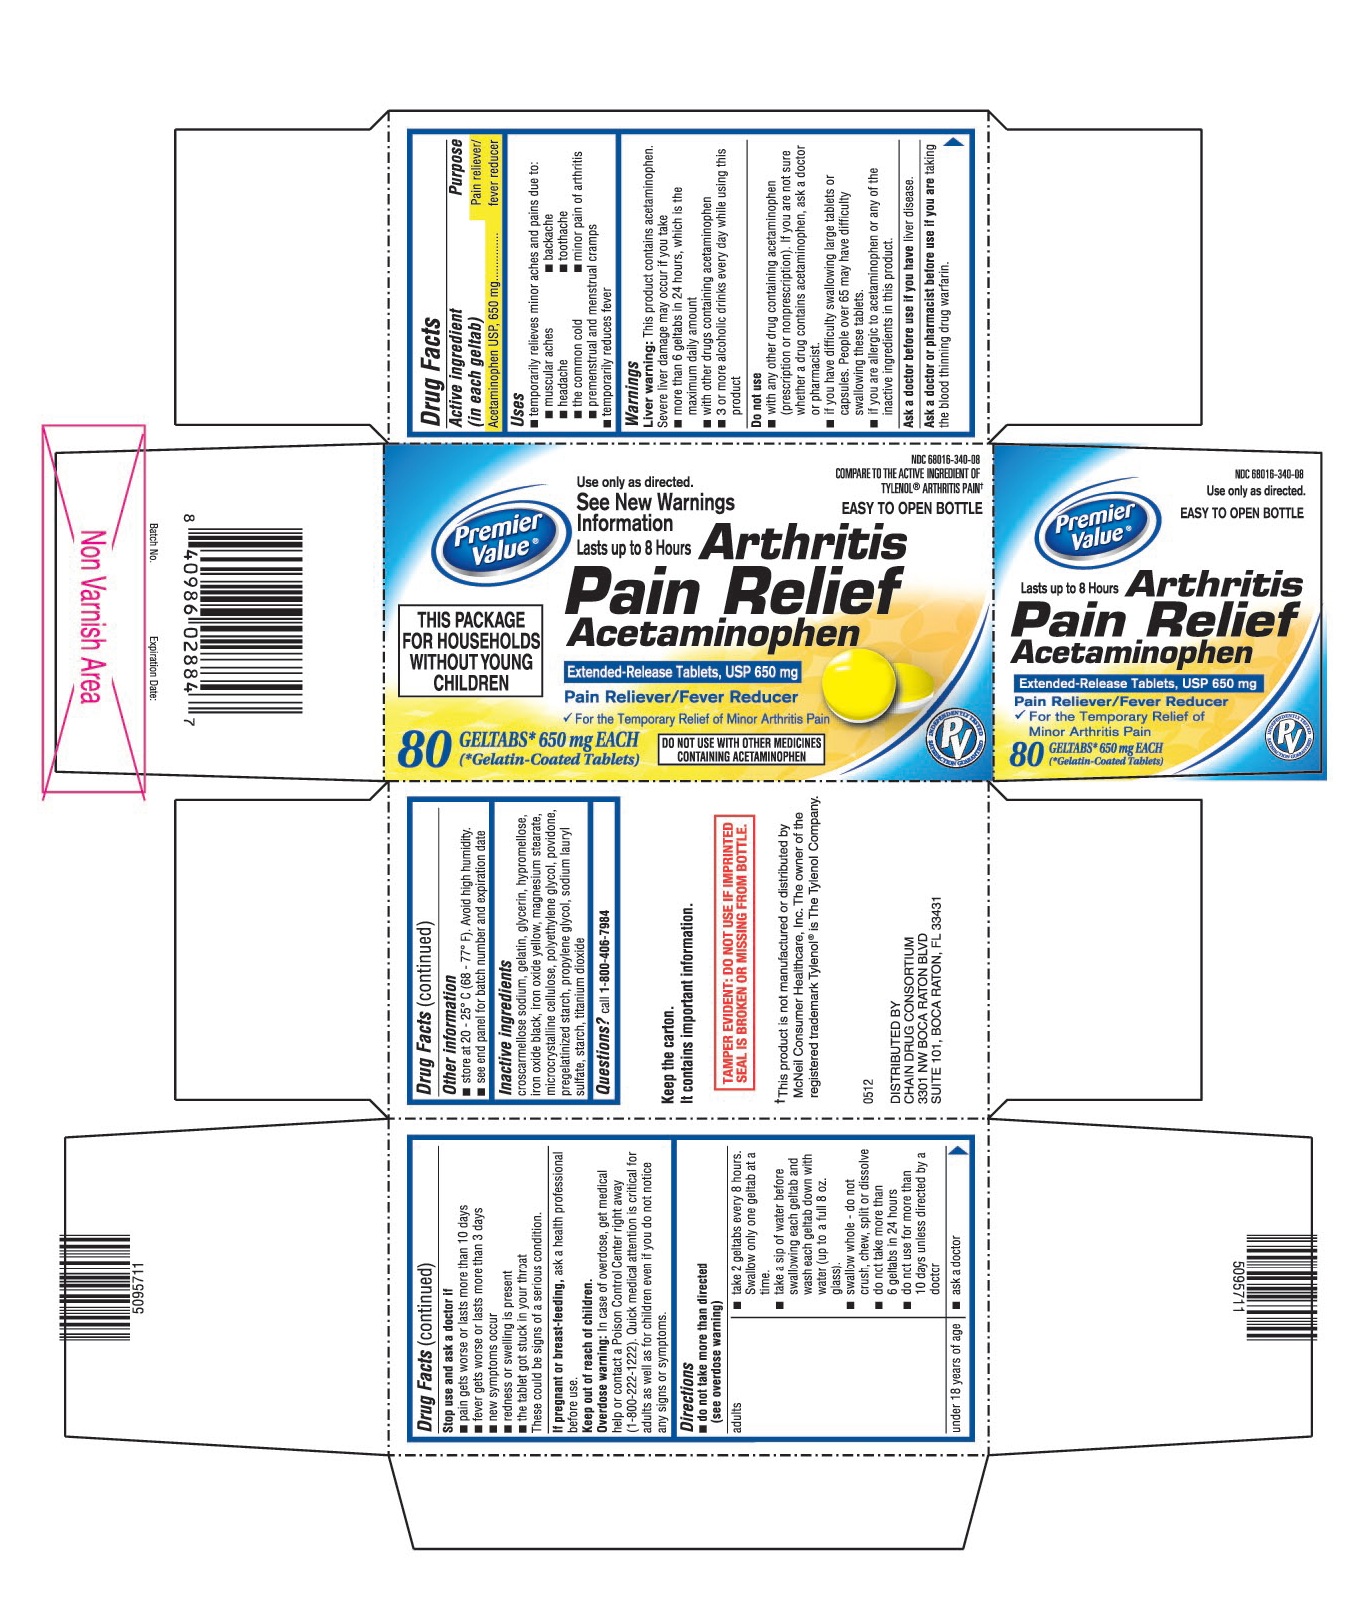 This is the bottle carton label for Premier Value 80 count Acetaminophen extended-release tablets, USP 650 mg (geltabs).